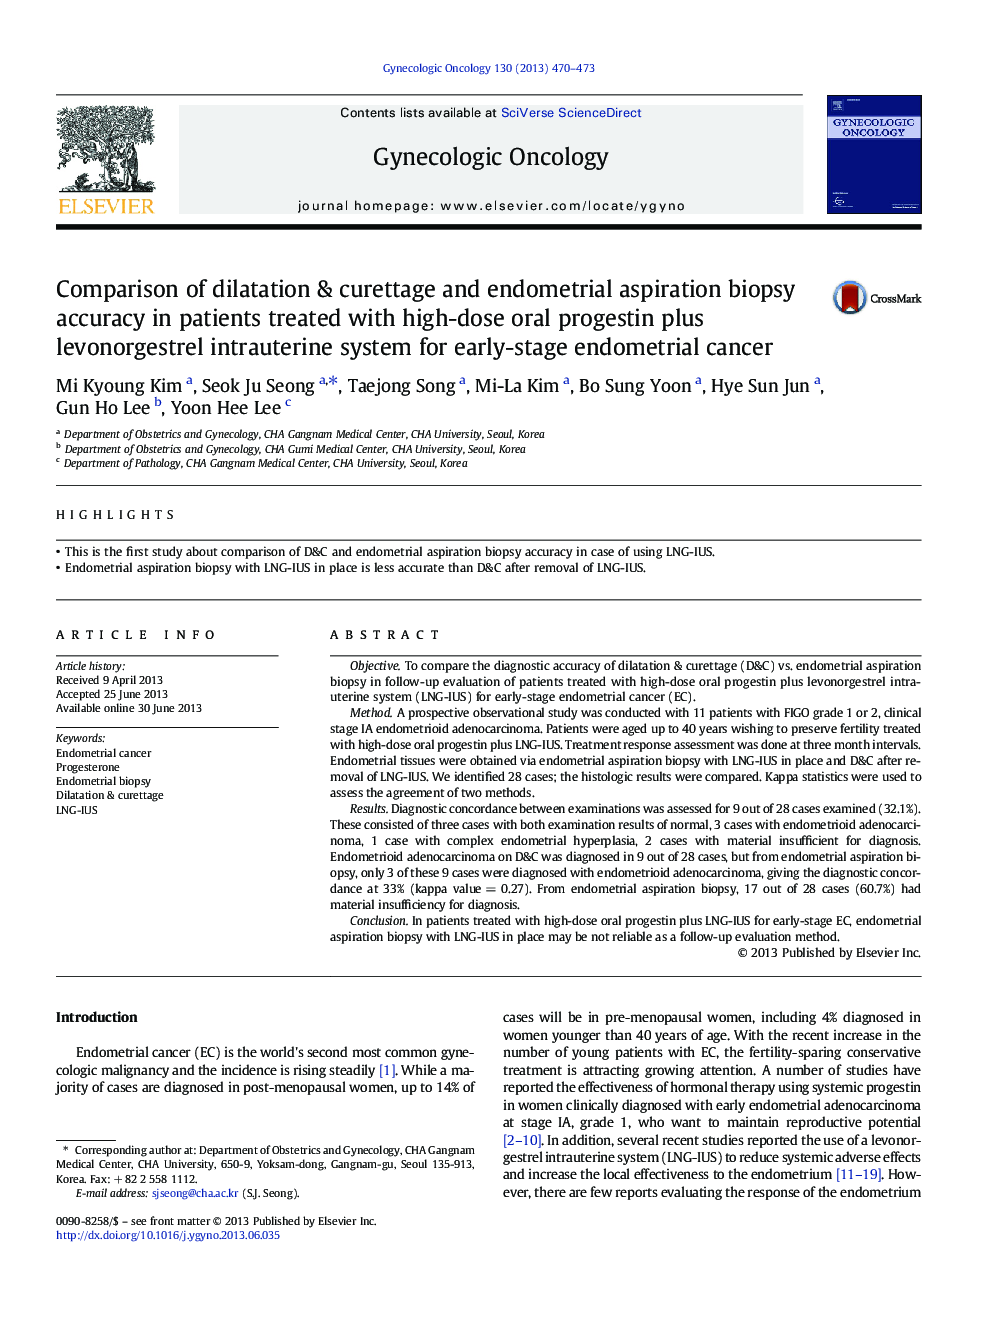 Comparison of dilatation & curettage and endometrial aspiration biopsy accuracy in patients treated with high-dose oral progestin plus levonorgestrel intrauterine system for early-stage endometrial cancer